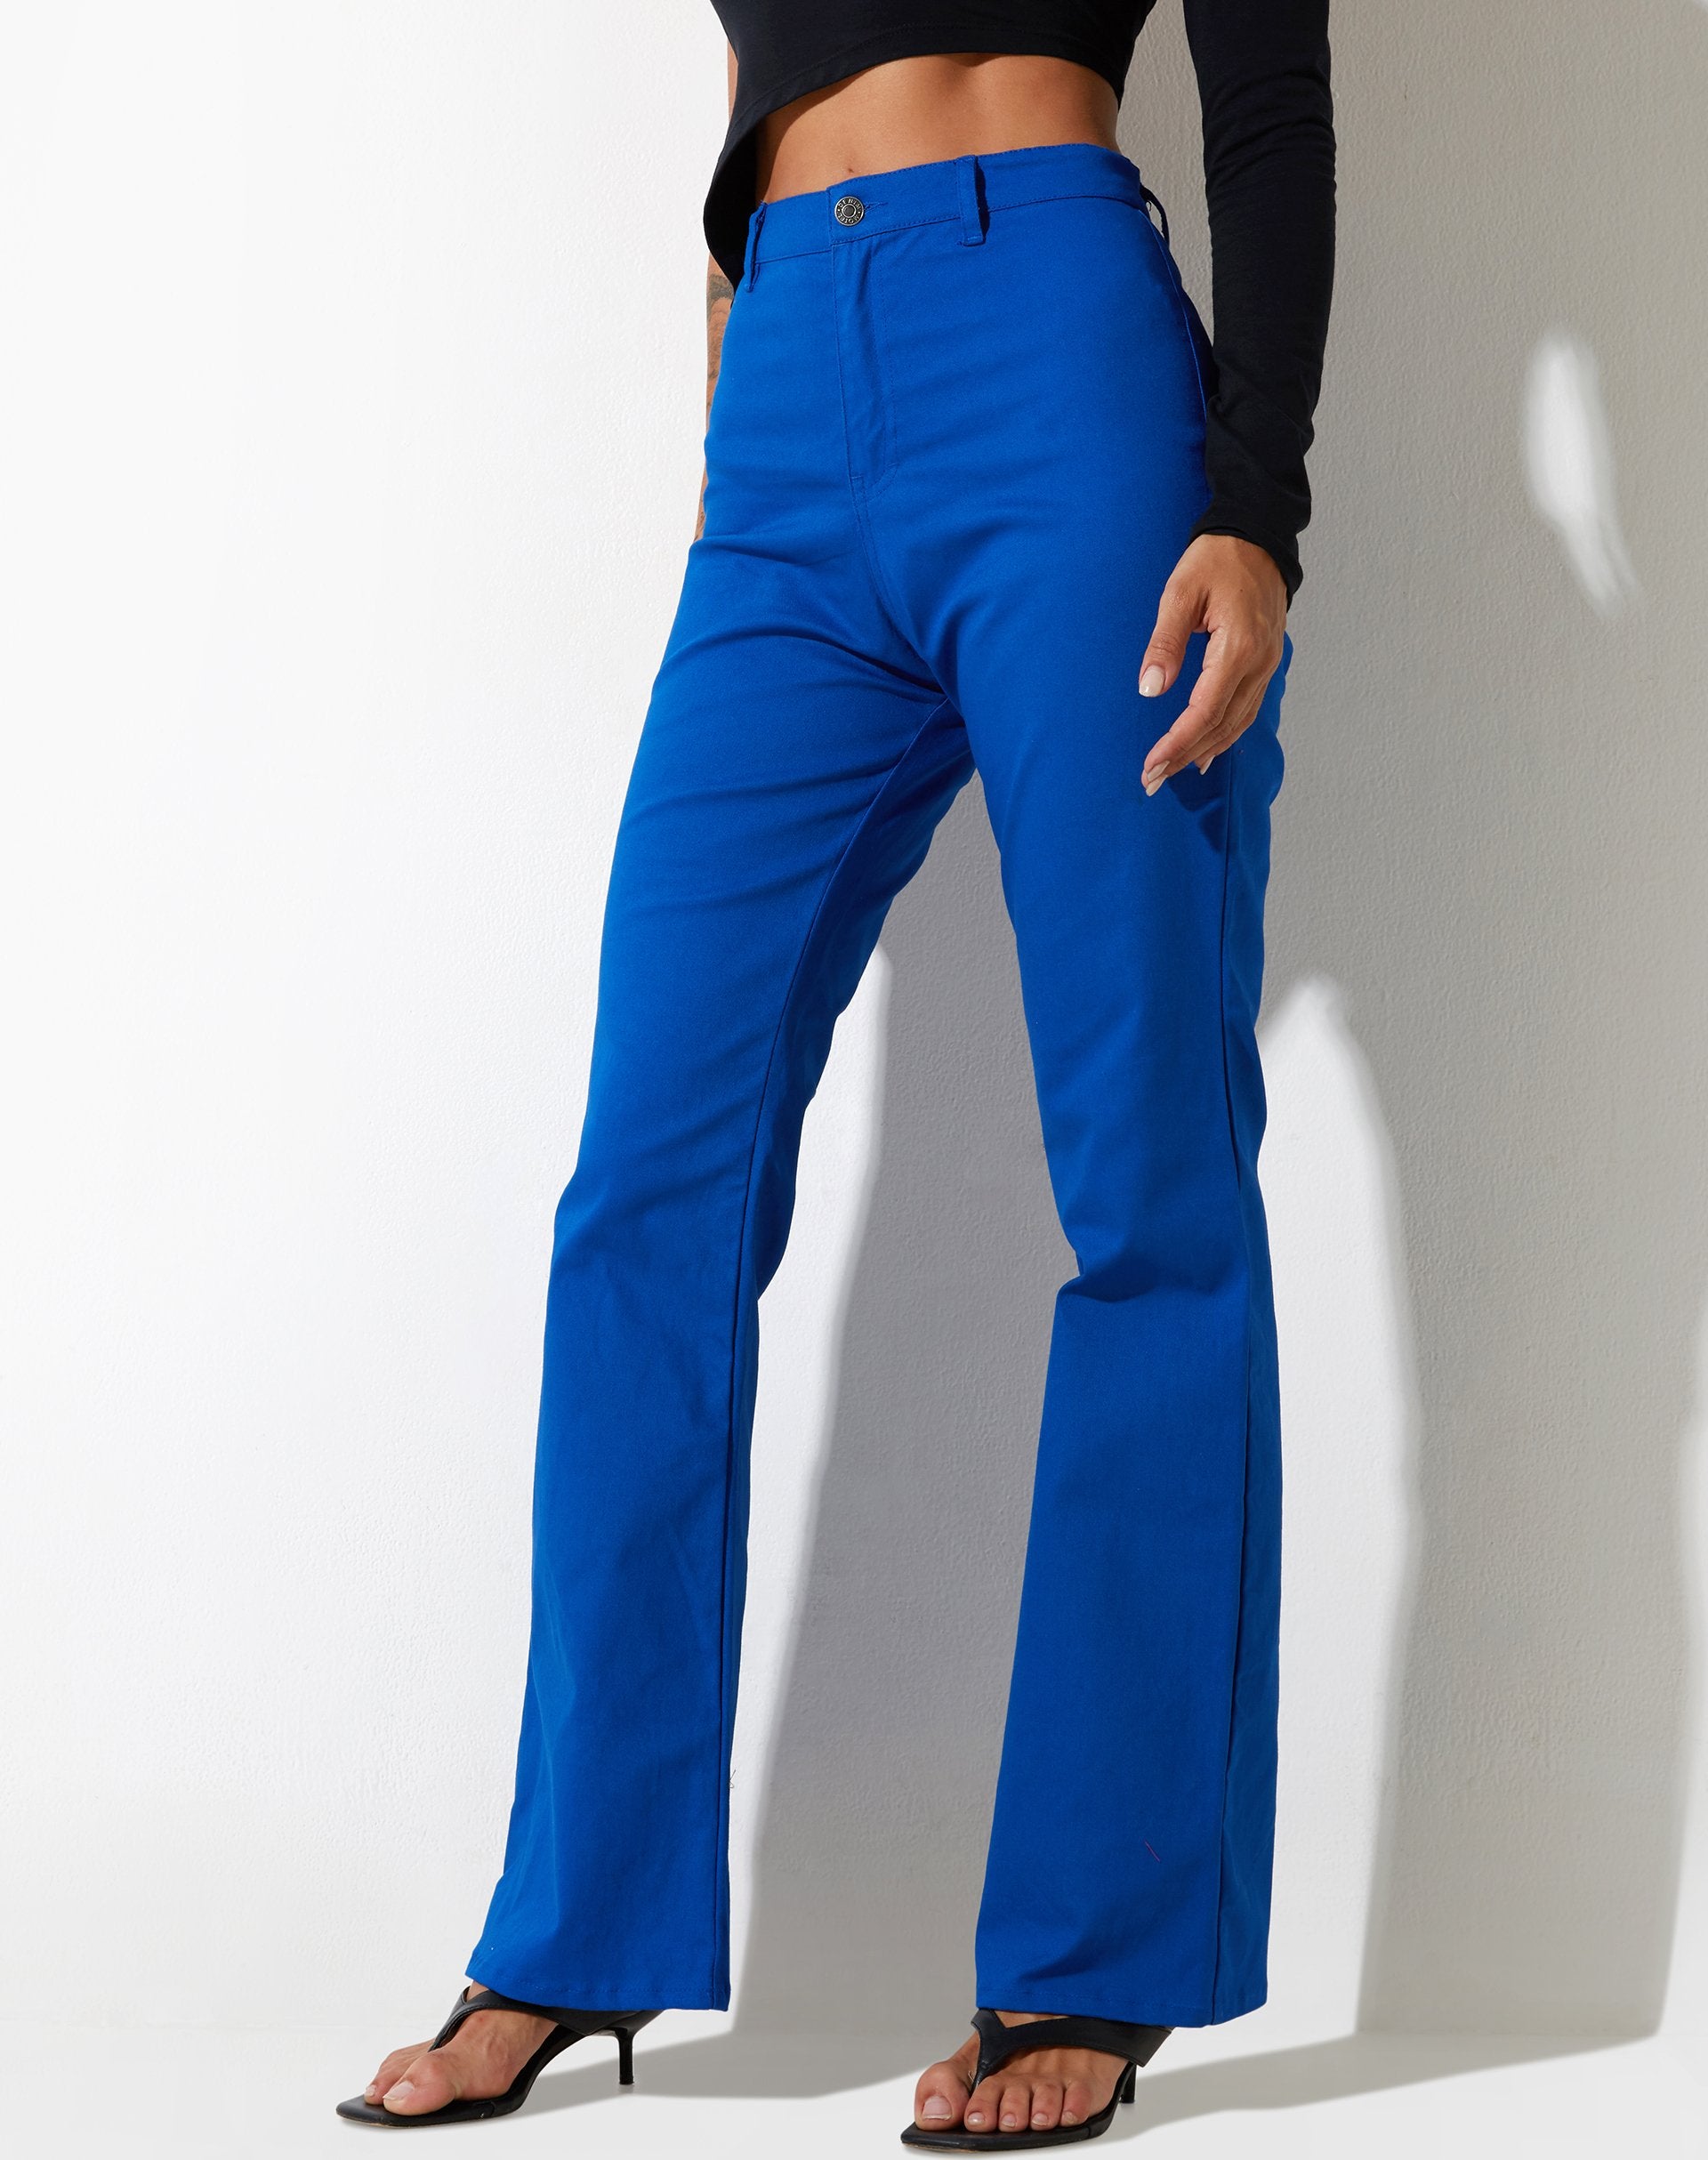 image of Zoven Flare Trouser in Twill Cobalt Blue